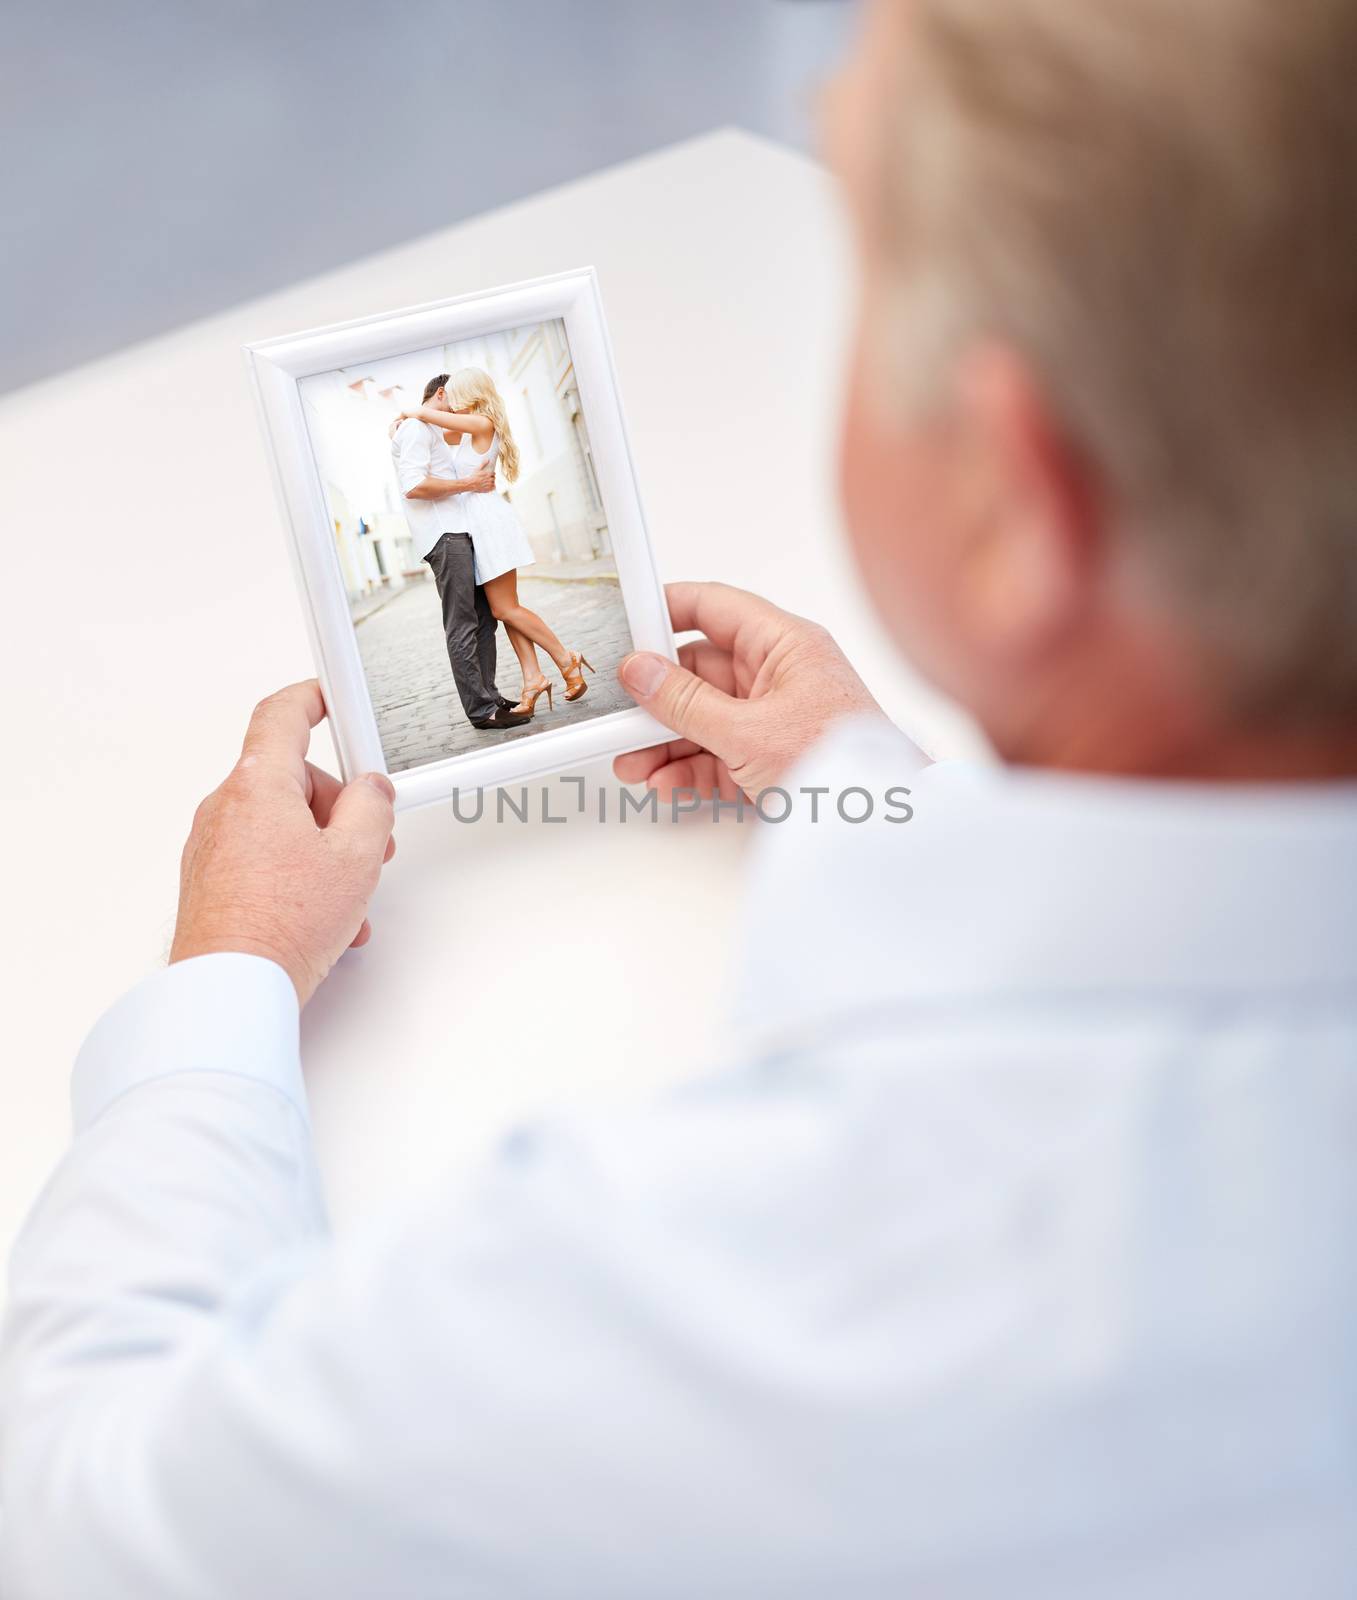 oldness, memories, nostalgia and people concept - close up of old man holding and looking at happy young couple photo